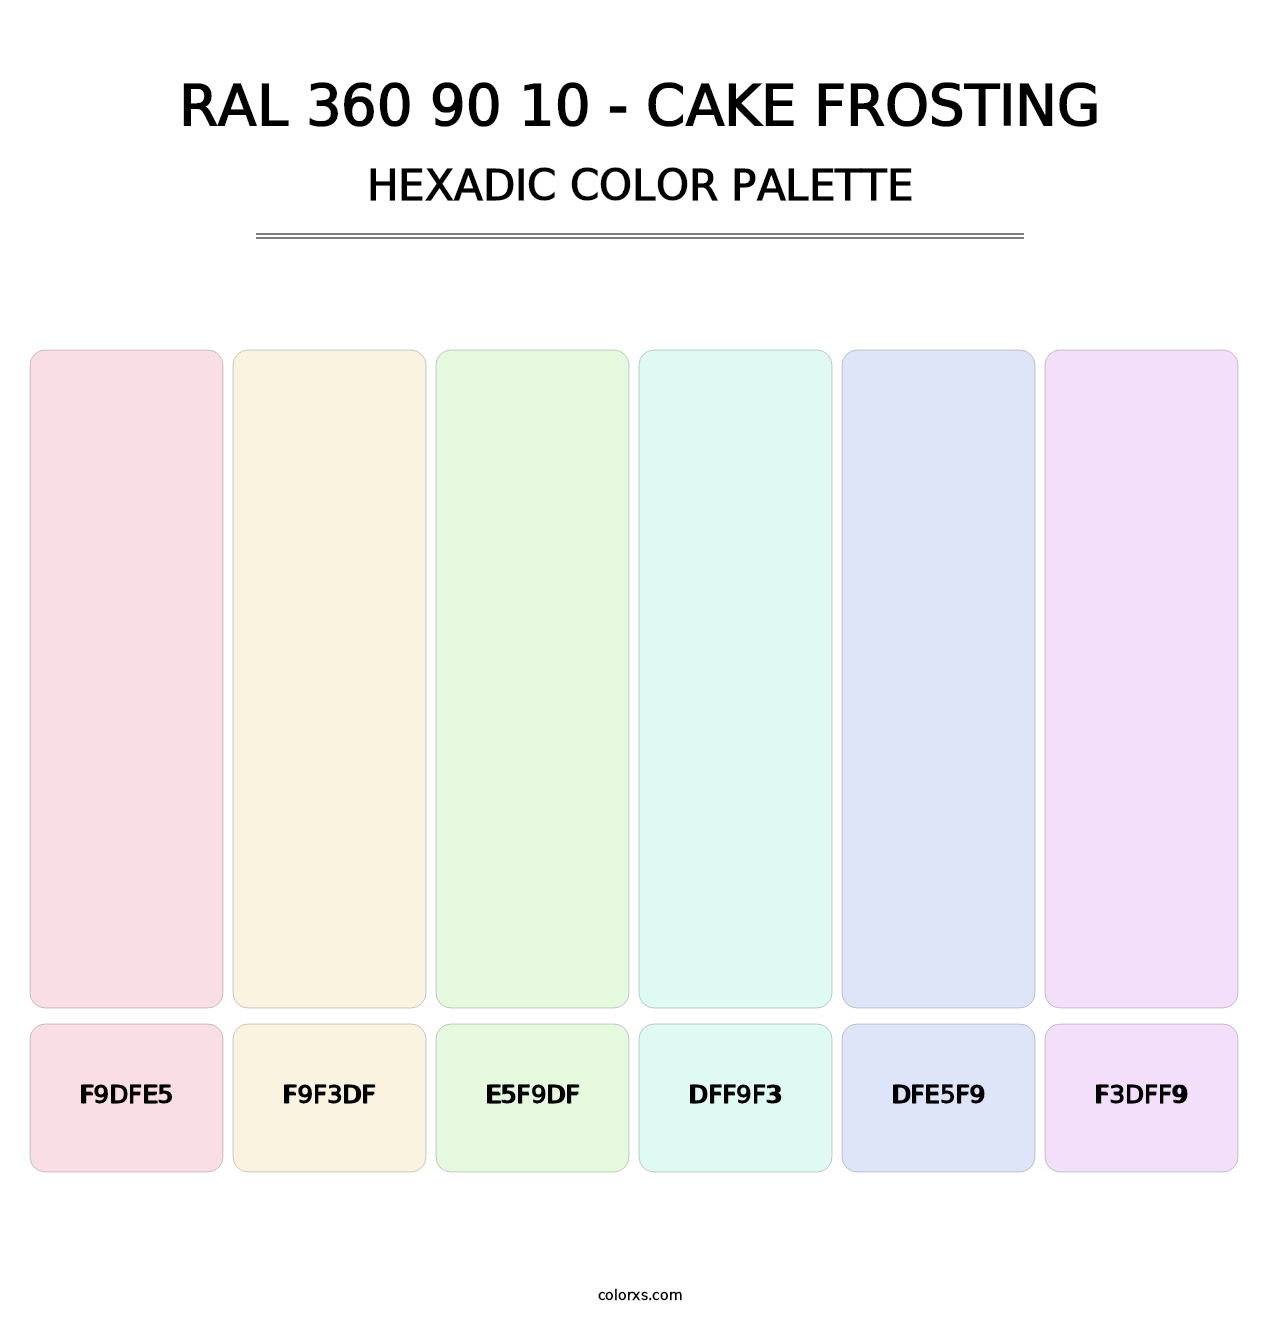 RAL 360 90 10 - Cake Frosting - Hexadic Color Palette